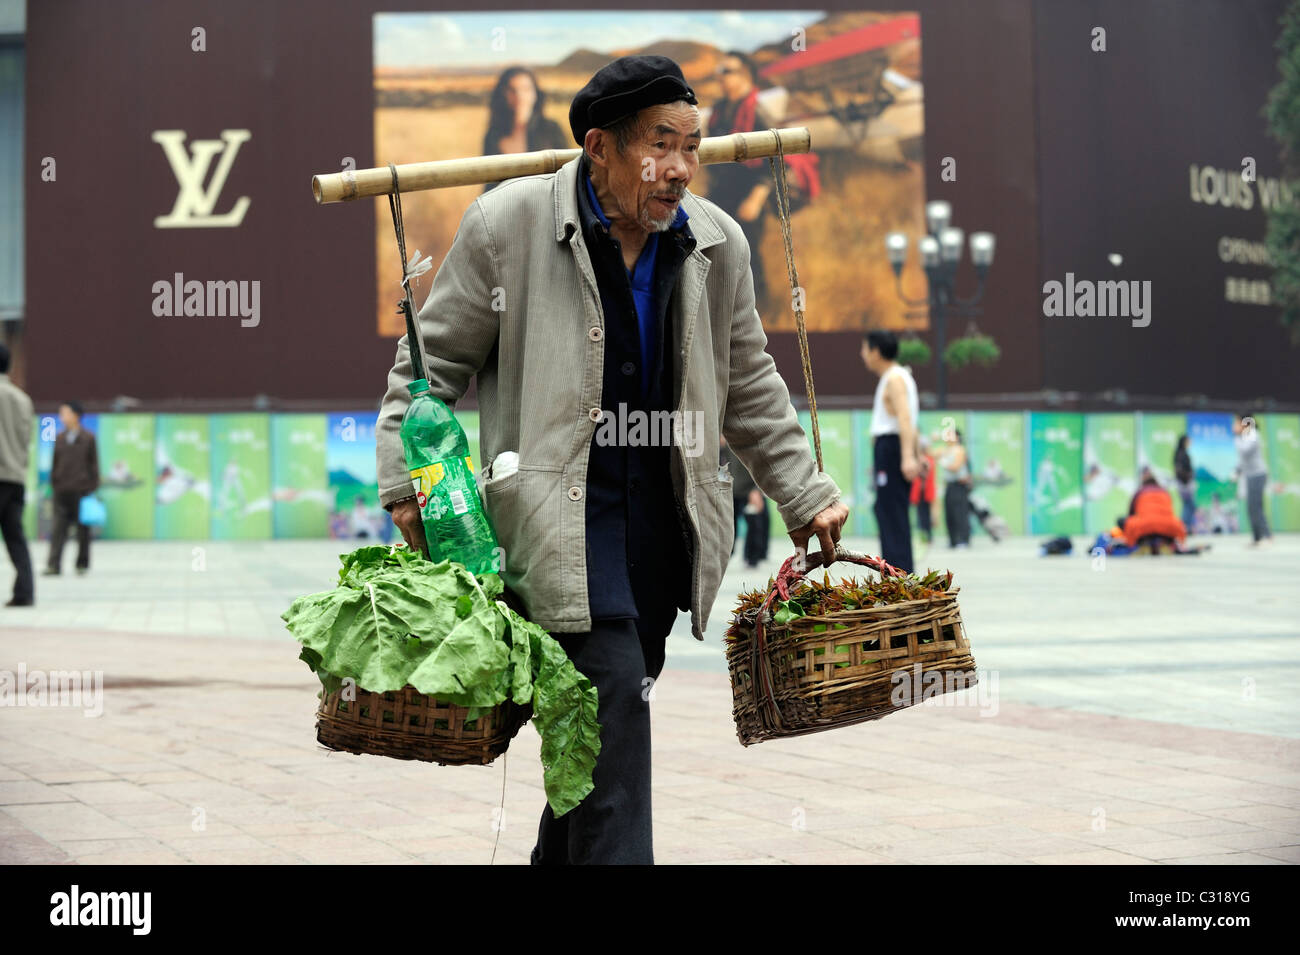 An elderly man selling vegetables in front of Louis Vuitton billboard in downtown Chongqing, China. 22-Apr-2011 Stock Photo